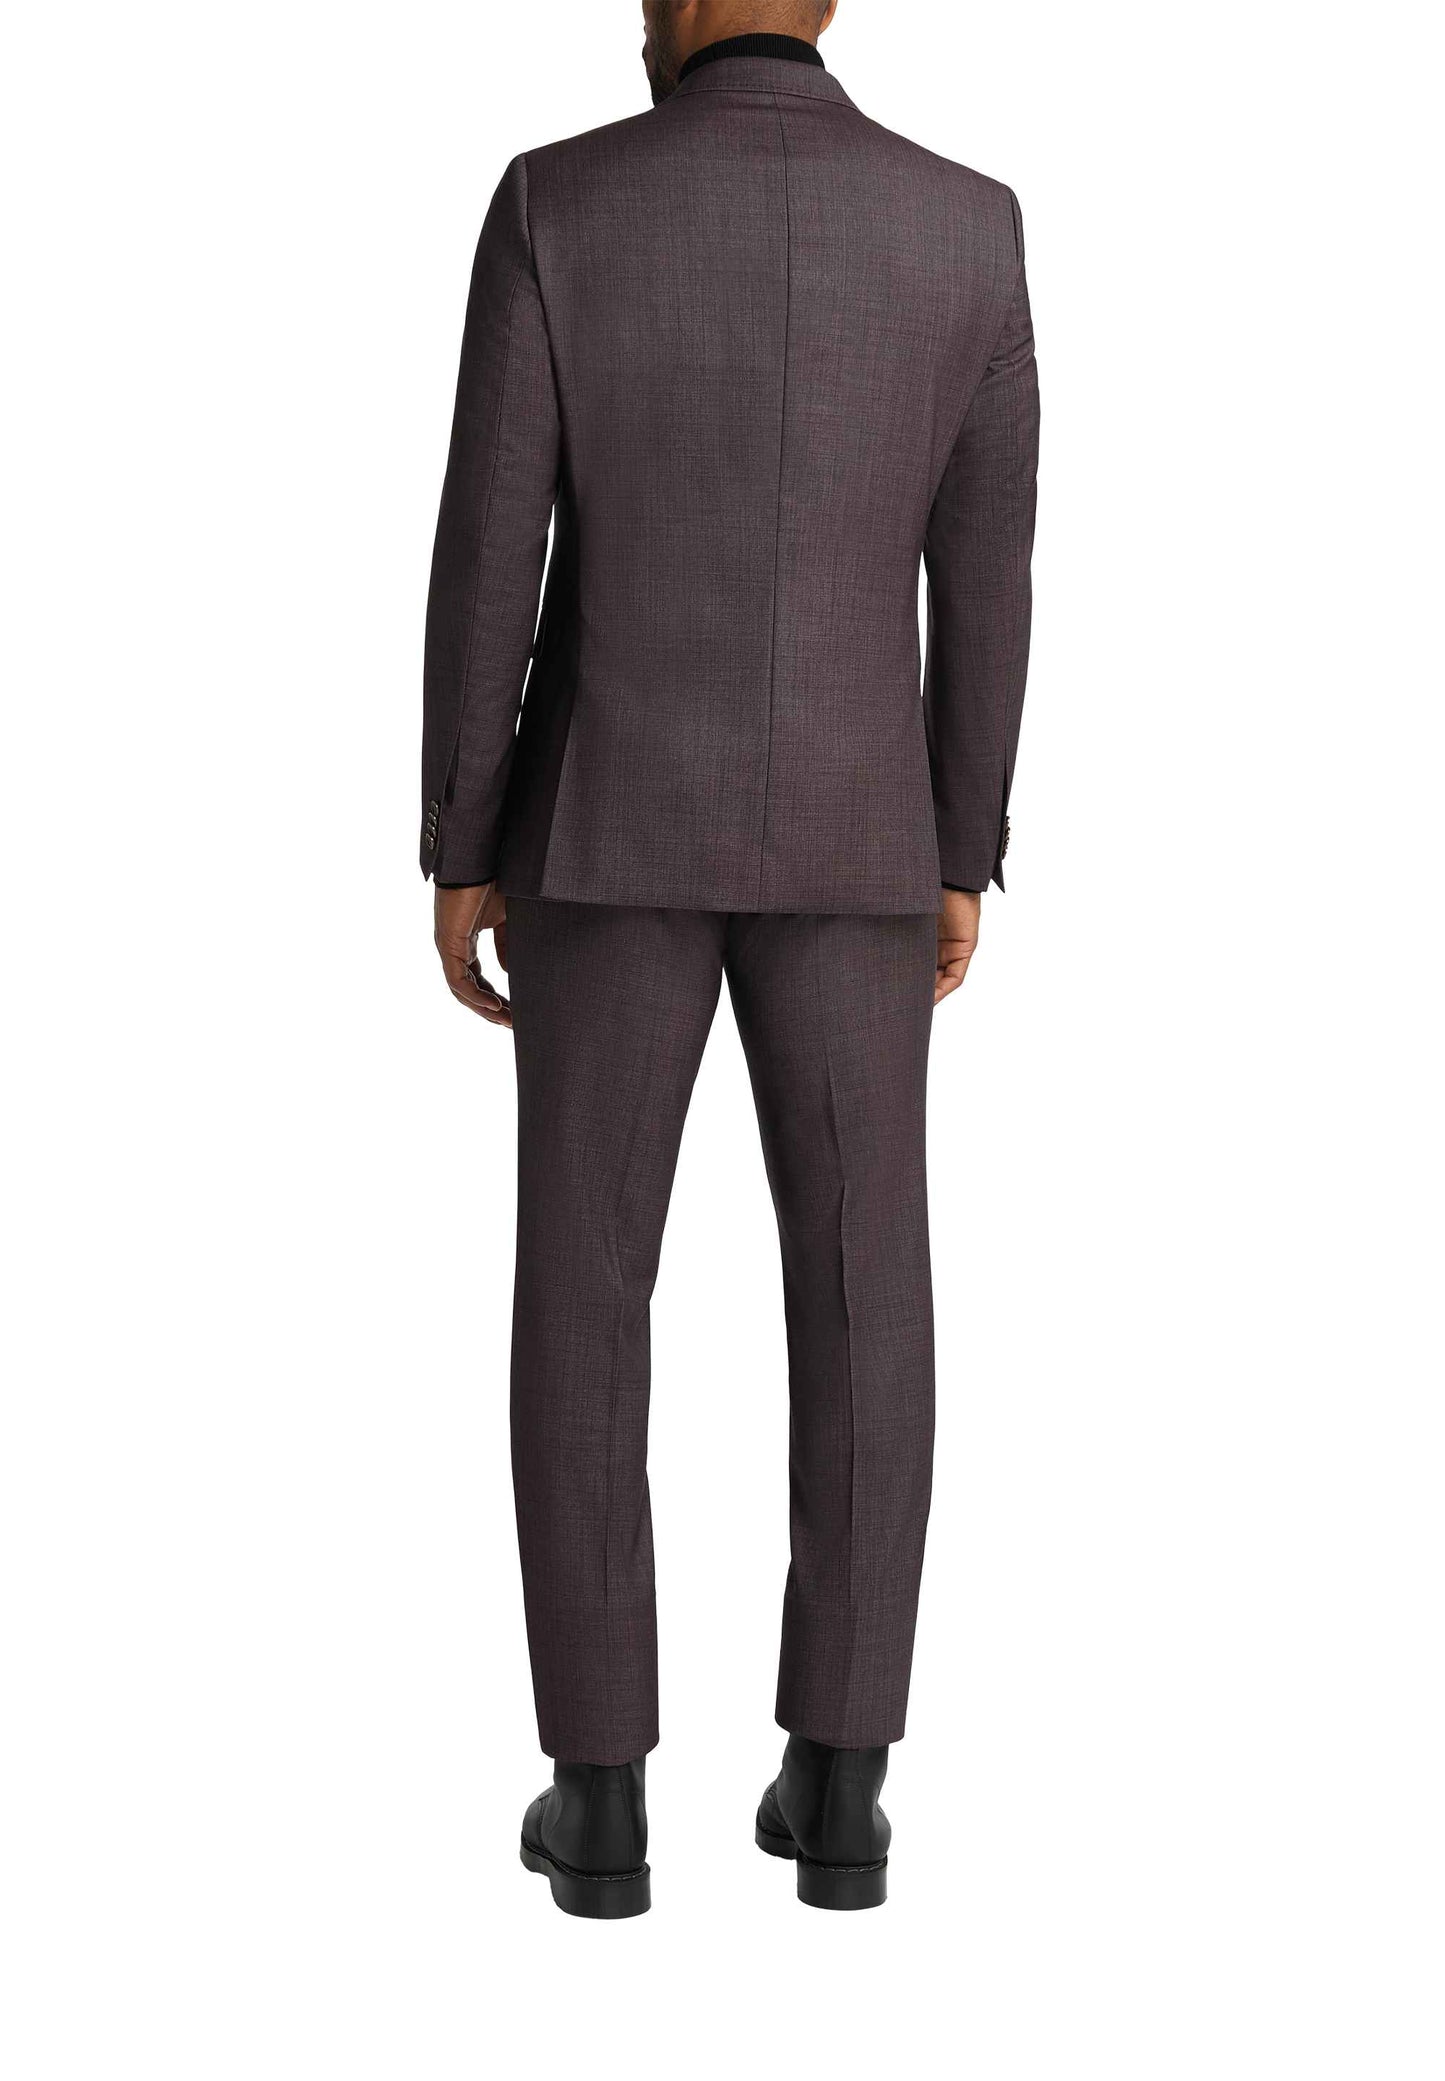 Your Own Party Club of Gents Two Piece Suit